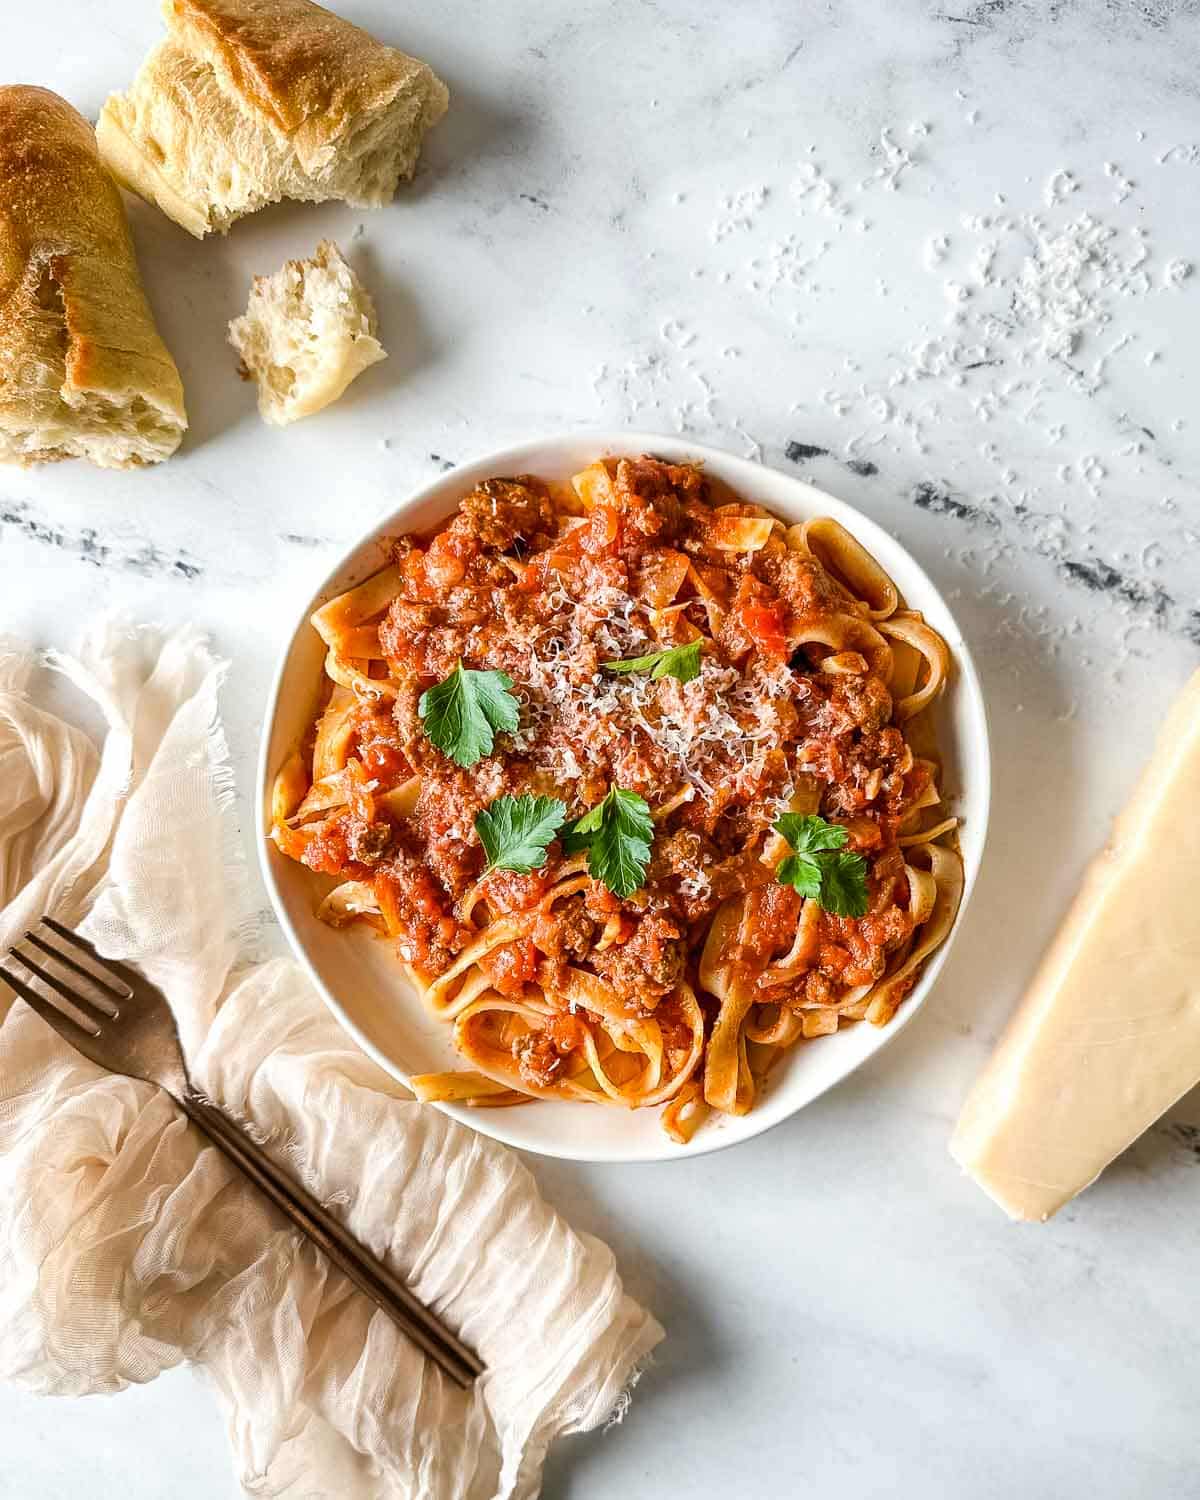 a plate of slow cooker lamb ragu over pappardelle pasta surrounded by a block of parmesan, a white linen, and torn baguette.